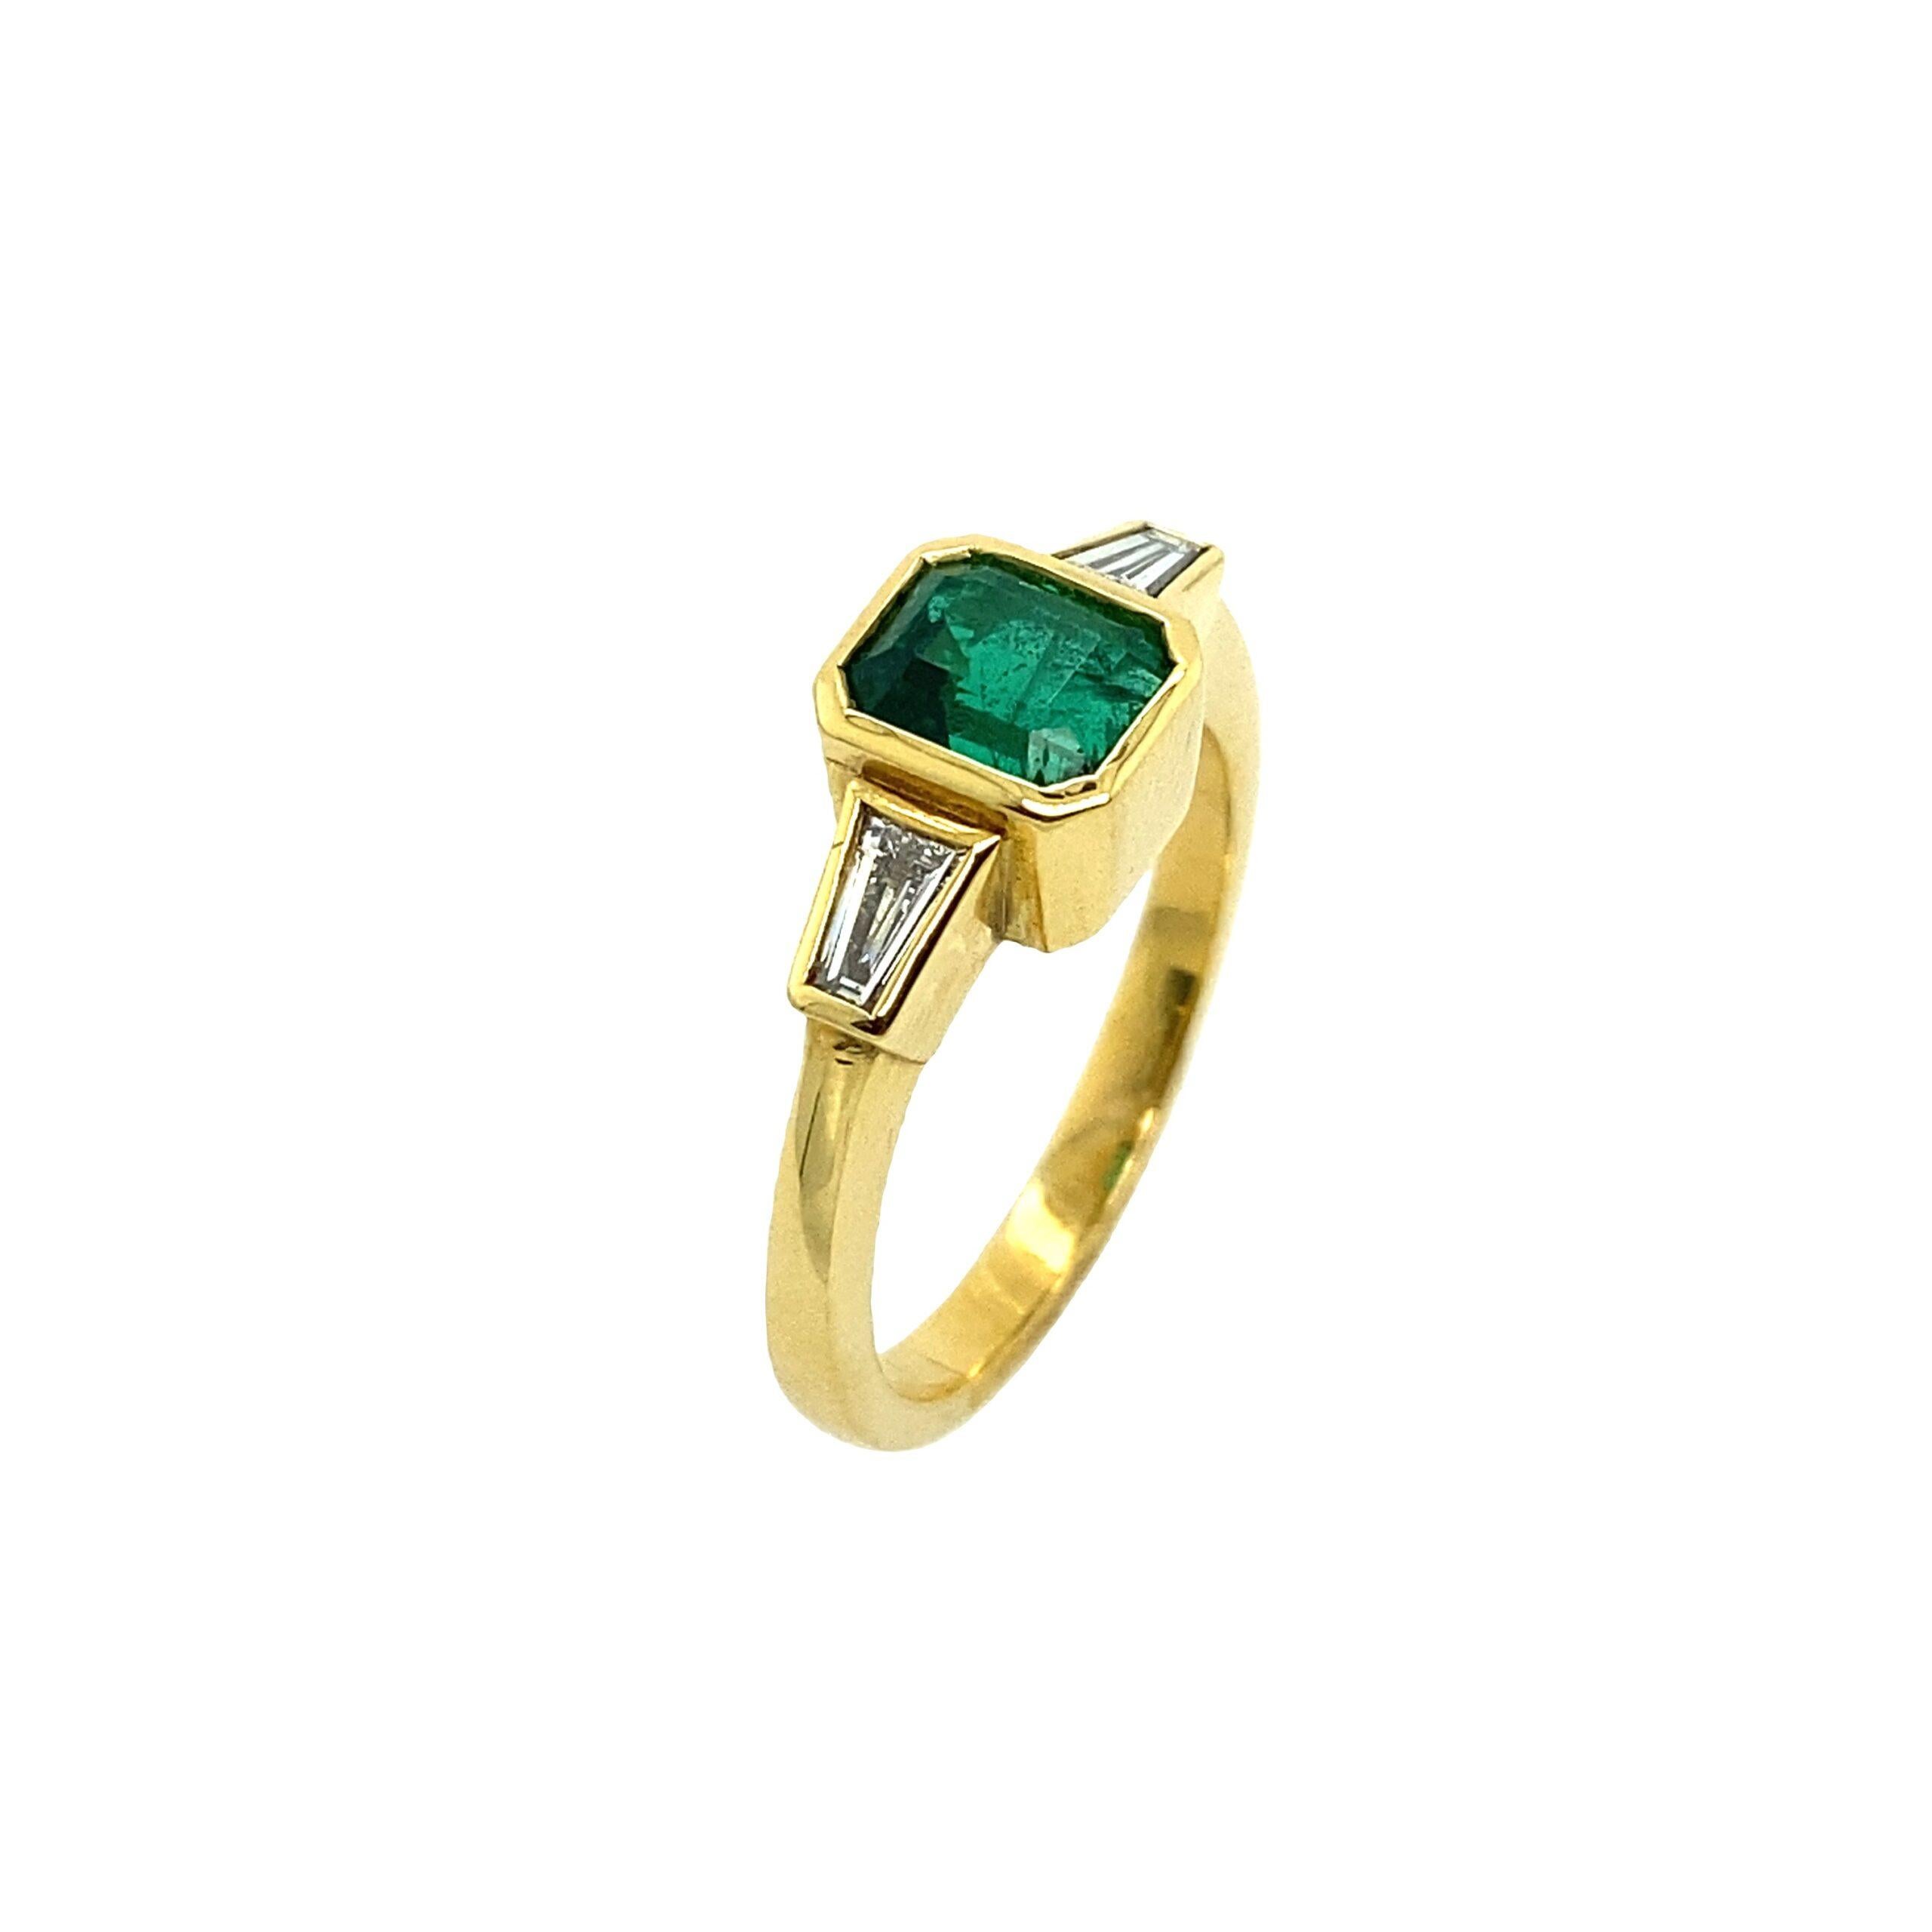 18ct Gold Fine Quality 1.04ct Emerald Cut Emerald Ring Tapered Baguettes

Additional Information:
Total Diamond Weight: 0.33ct Diamond Colour: F
Diamond Clarity: VS
Total Weight: 5.2g
Ring Size: M